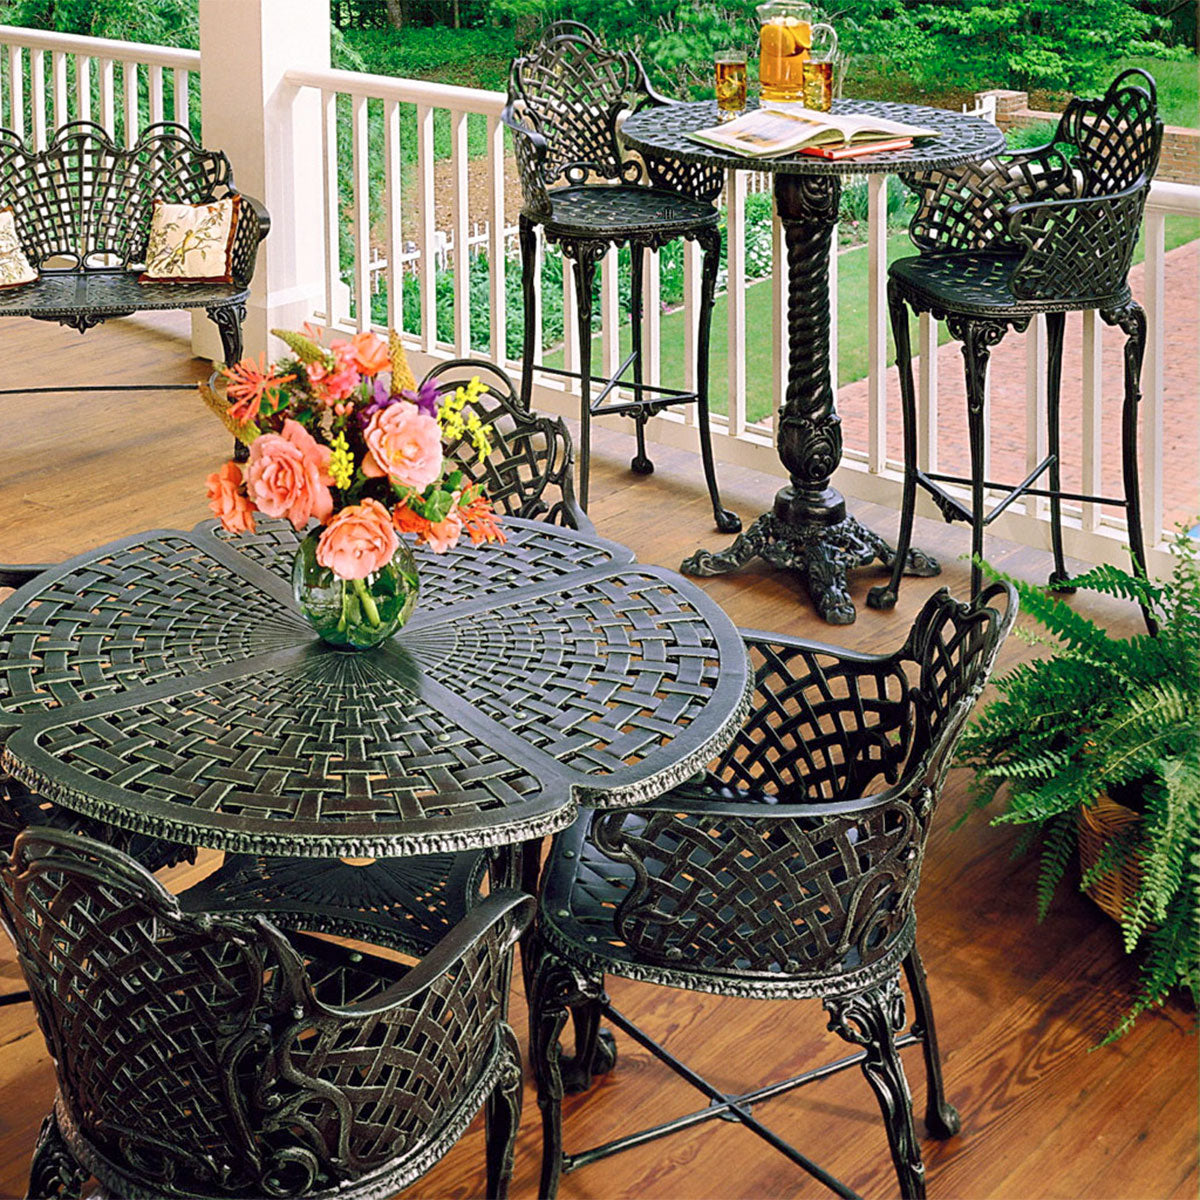 take a seat in style: three coins aluminum patio furniture - iron